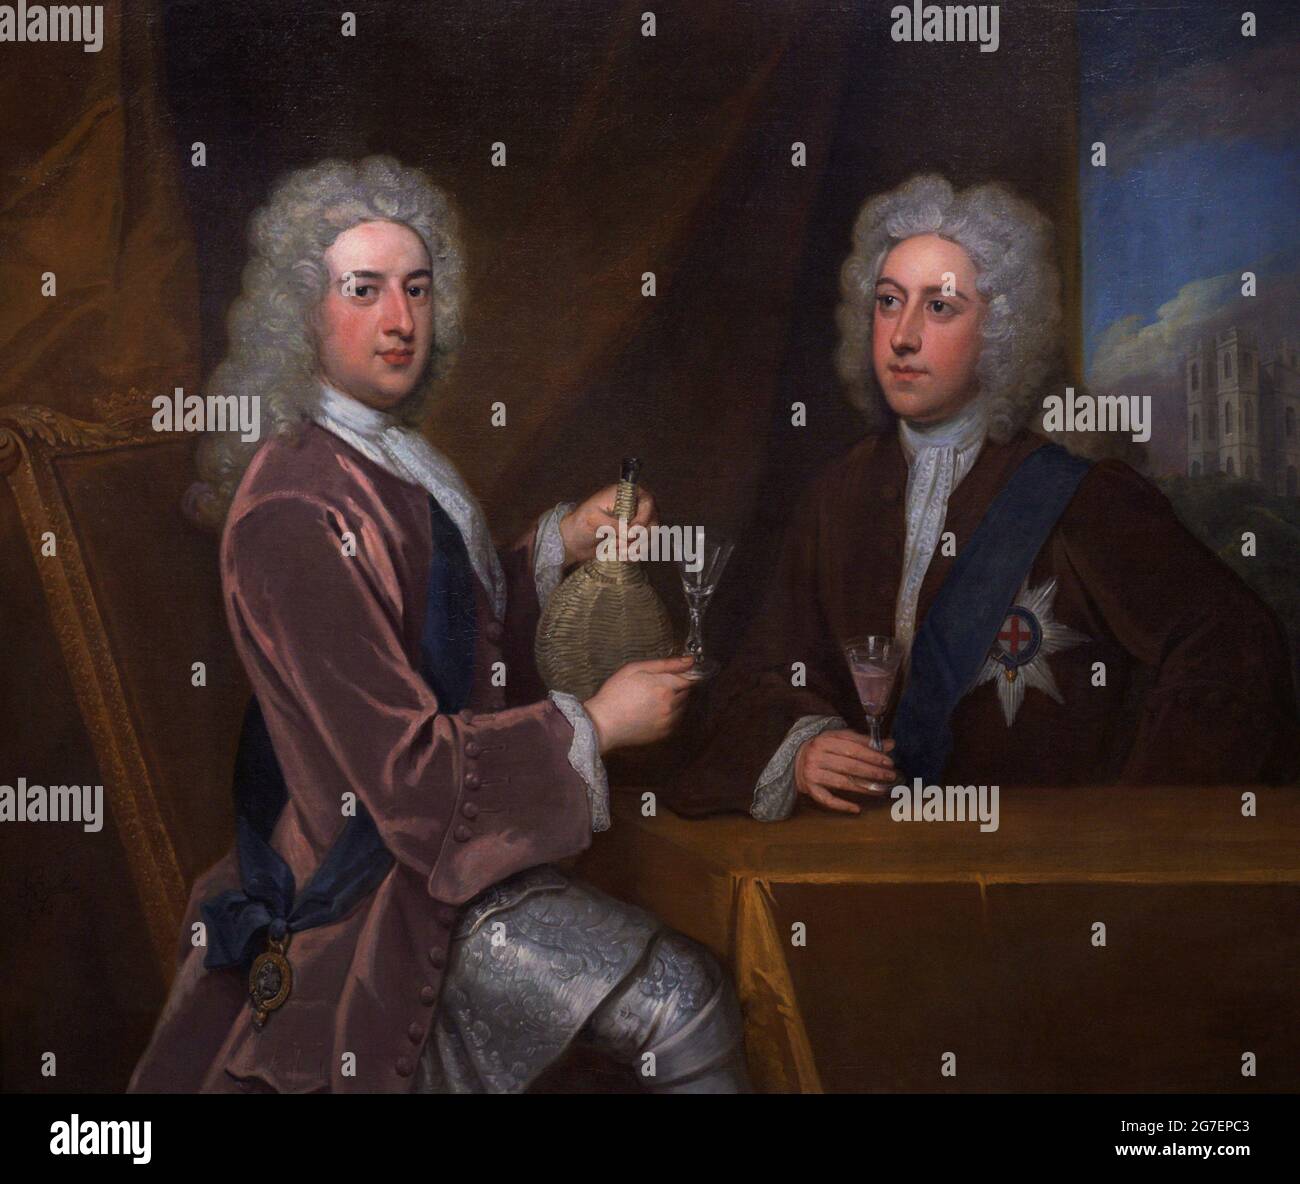 Thomas Pelham-Holles (1693-1768), 1st Duke of Newcastle-under-Lyne (left). British statesman, Prime Minister. Henry Clinton, 7th Earl of Lincoln (1684-1728) (right). Magnate. Painting by Sir Godfred Kneller (1646-1723). Oil on canvas (127 x 149,2 cm), ca. 1721. National Portrait Gallery. London, England, United Kingdom. Stock Photo